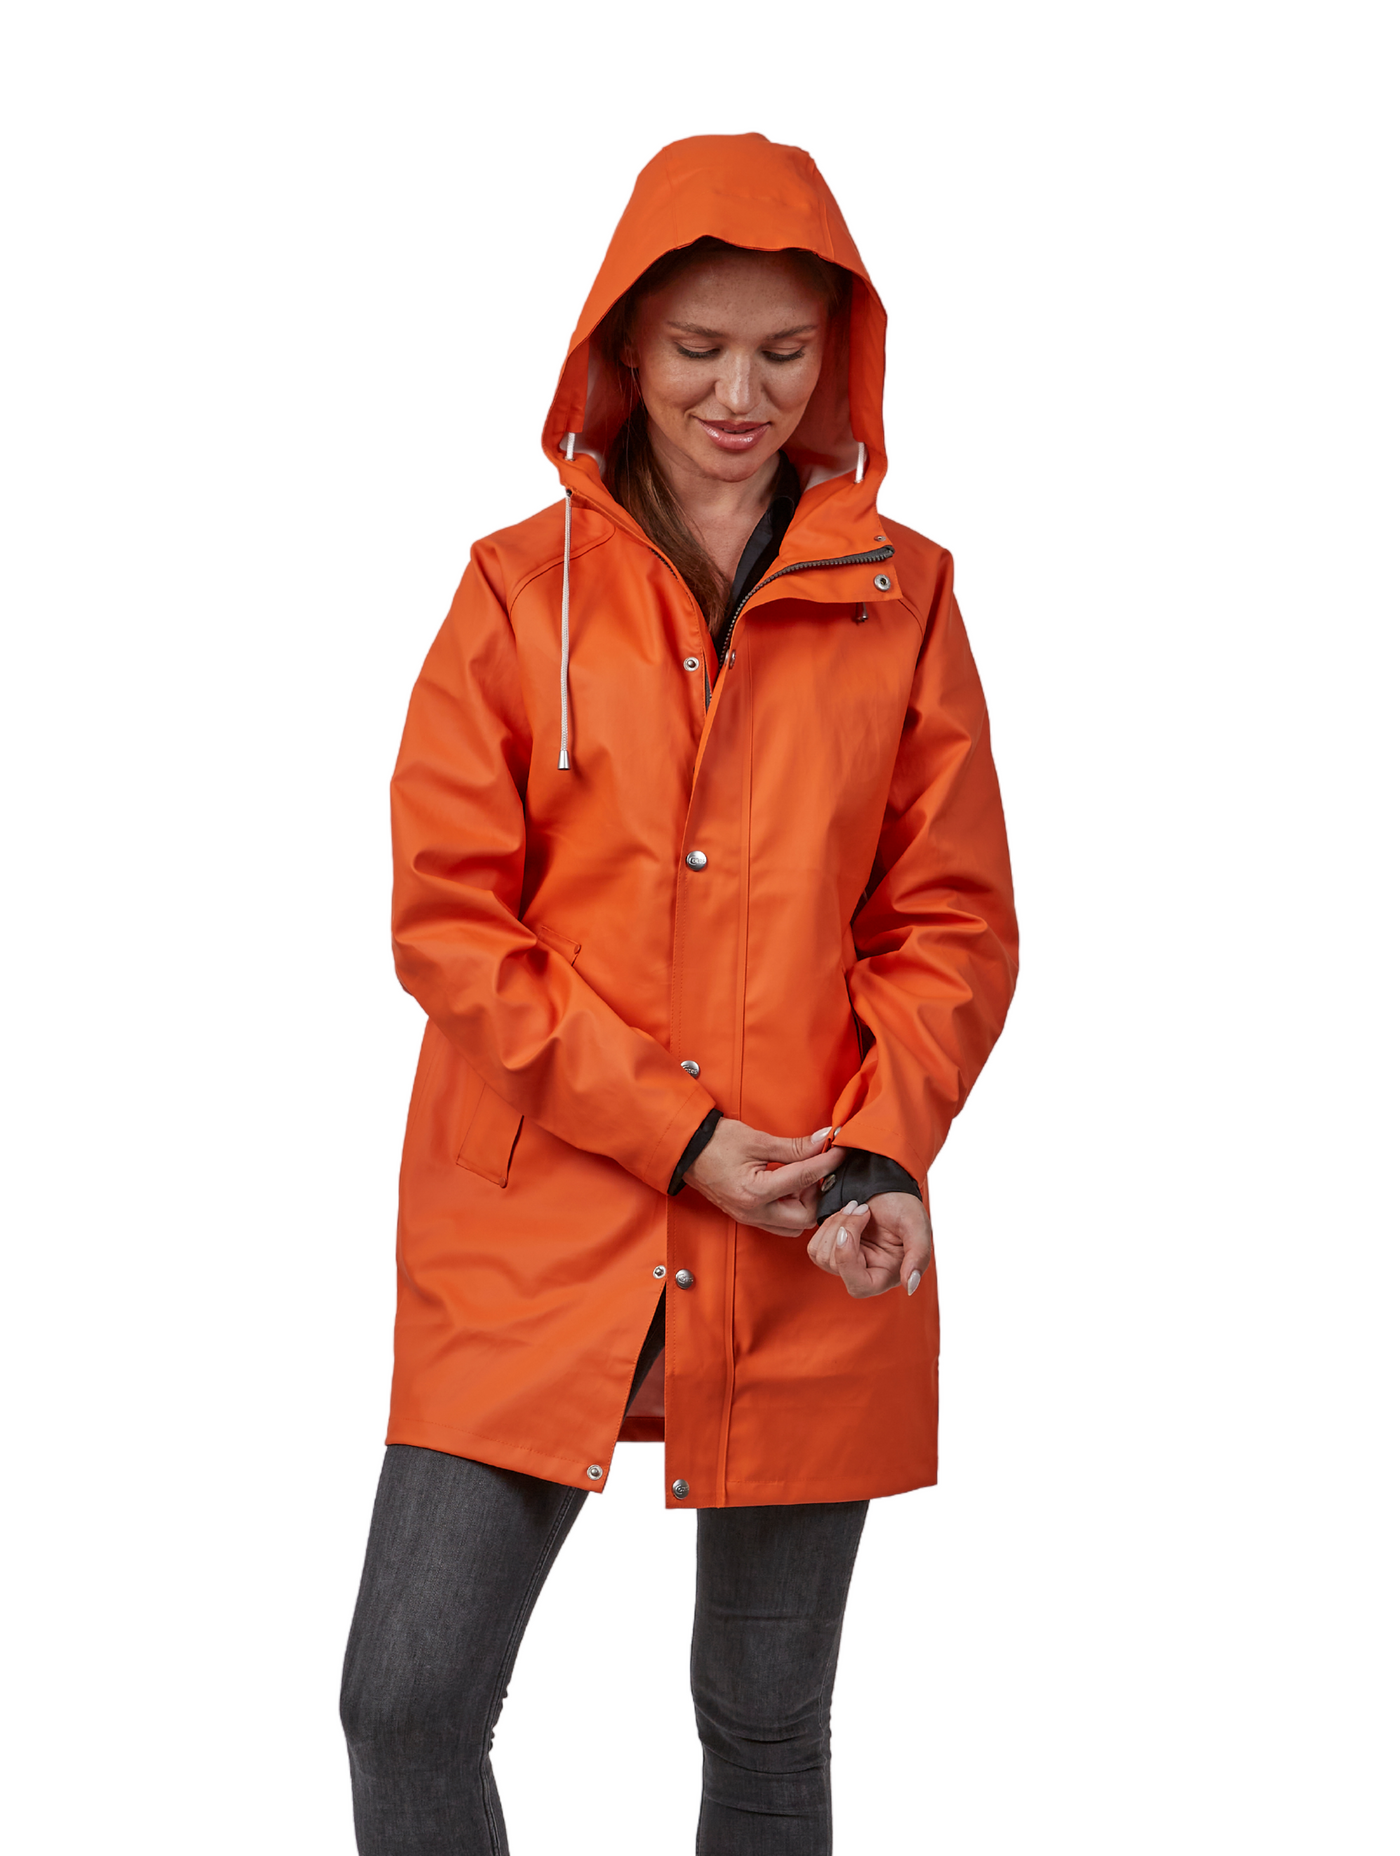 The Manchester Raincoat